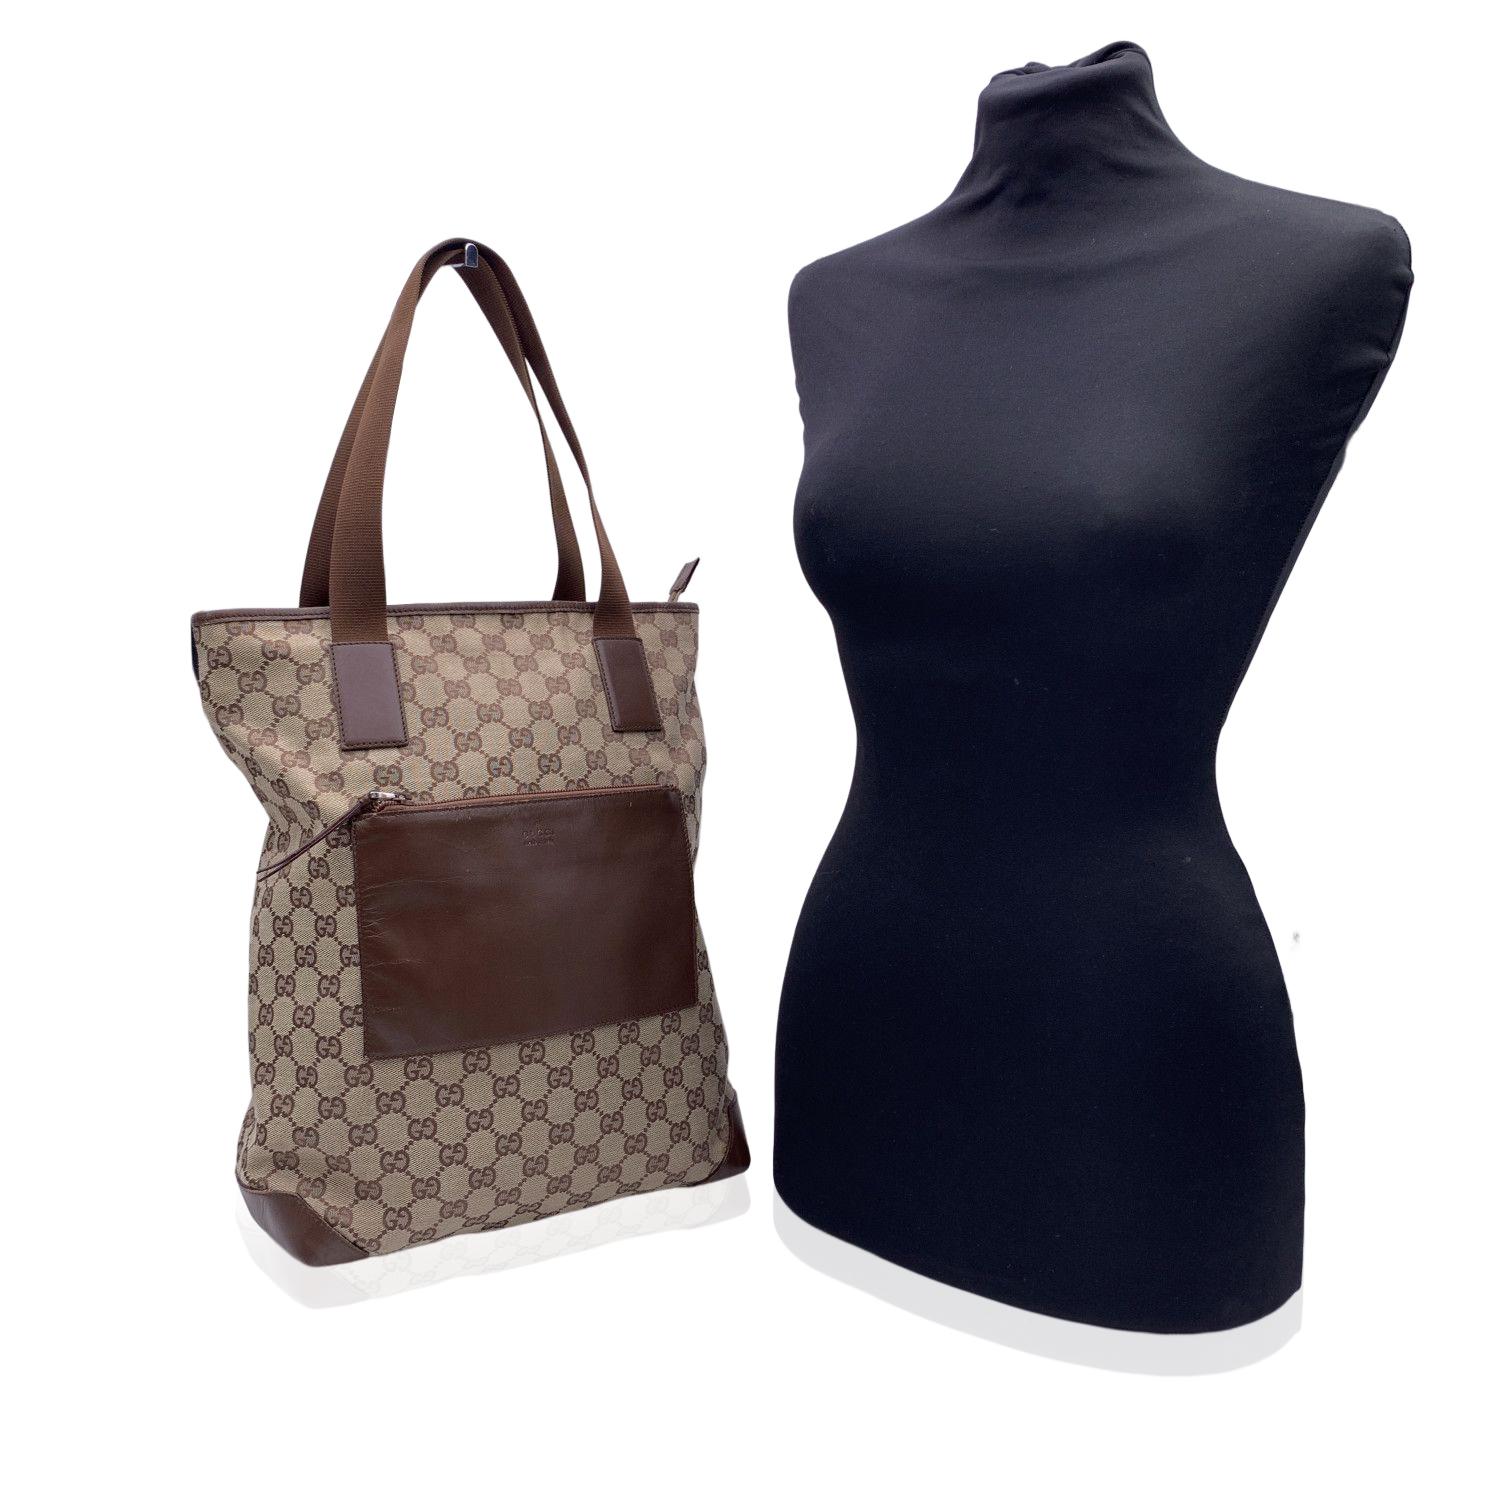 Beautiful Gucci tote made in monogram canvas with brown leather trim and front pocket. 1 front patch pocket with zip closure. Upper zipper closure. Brown canvas lining. 1 side zip pocket inside. 'GUCCI - Made in Italy' tag inside (with serial number